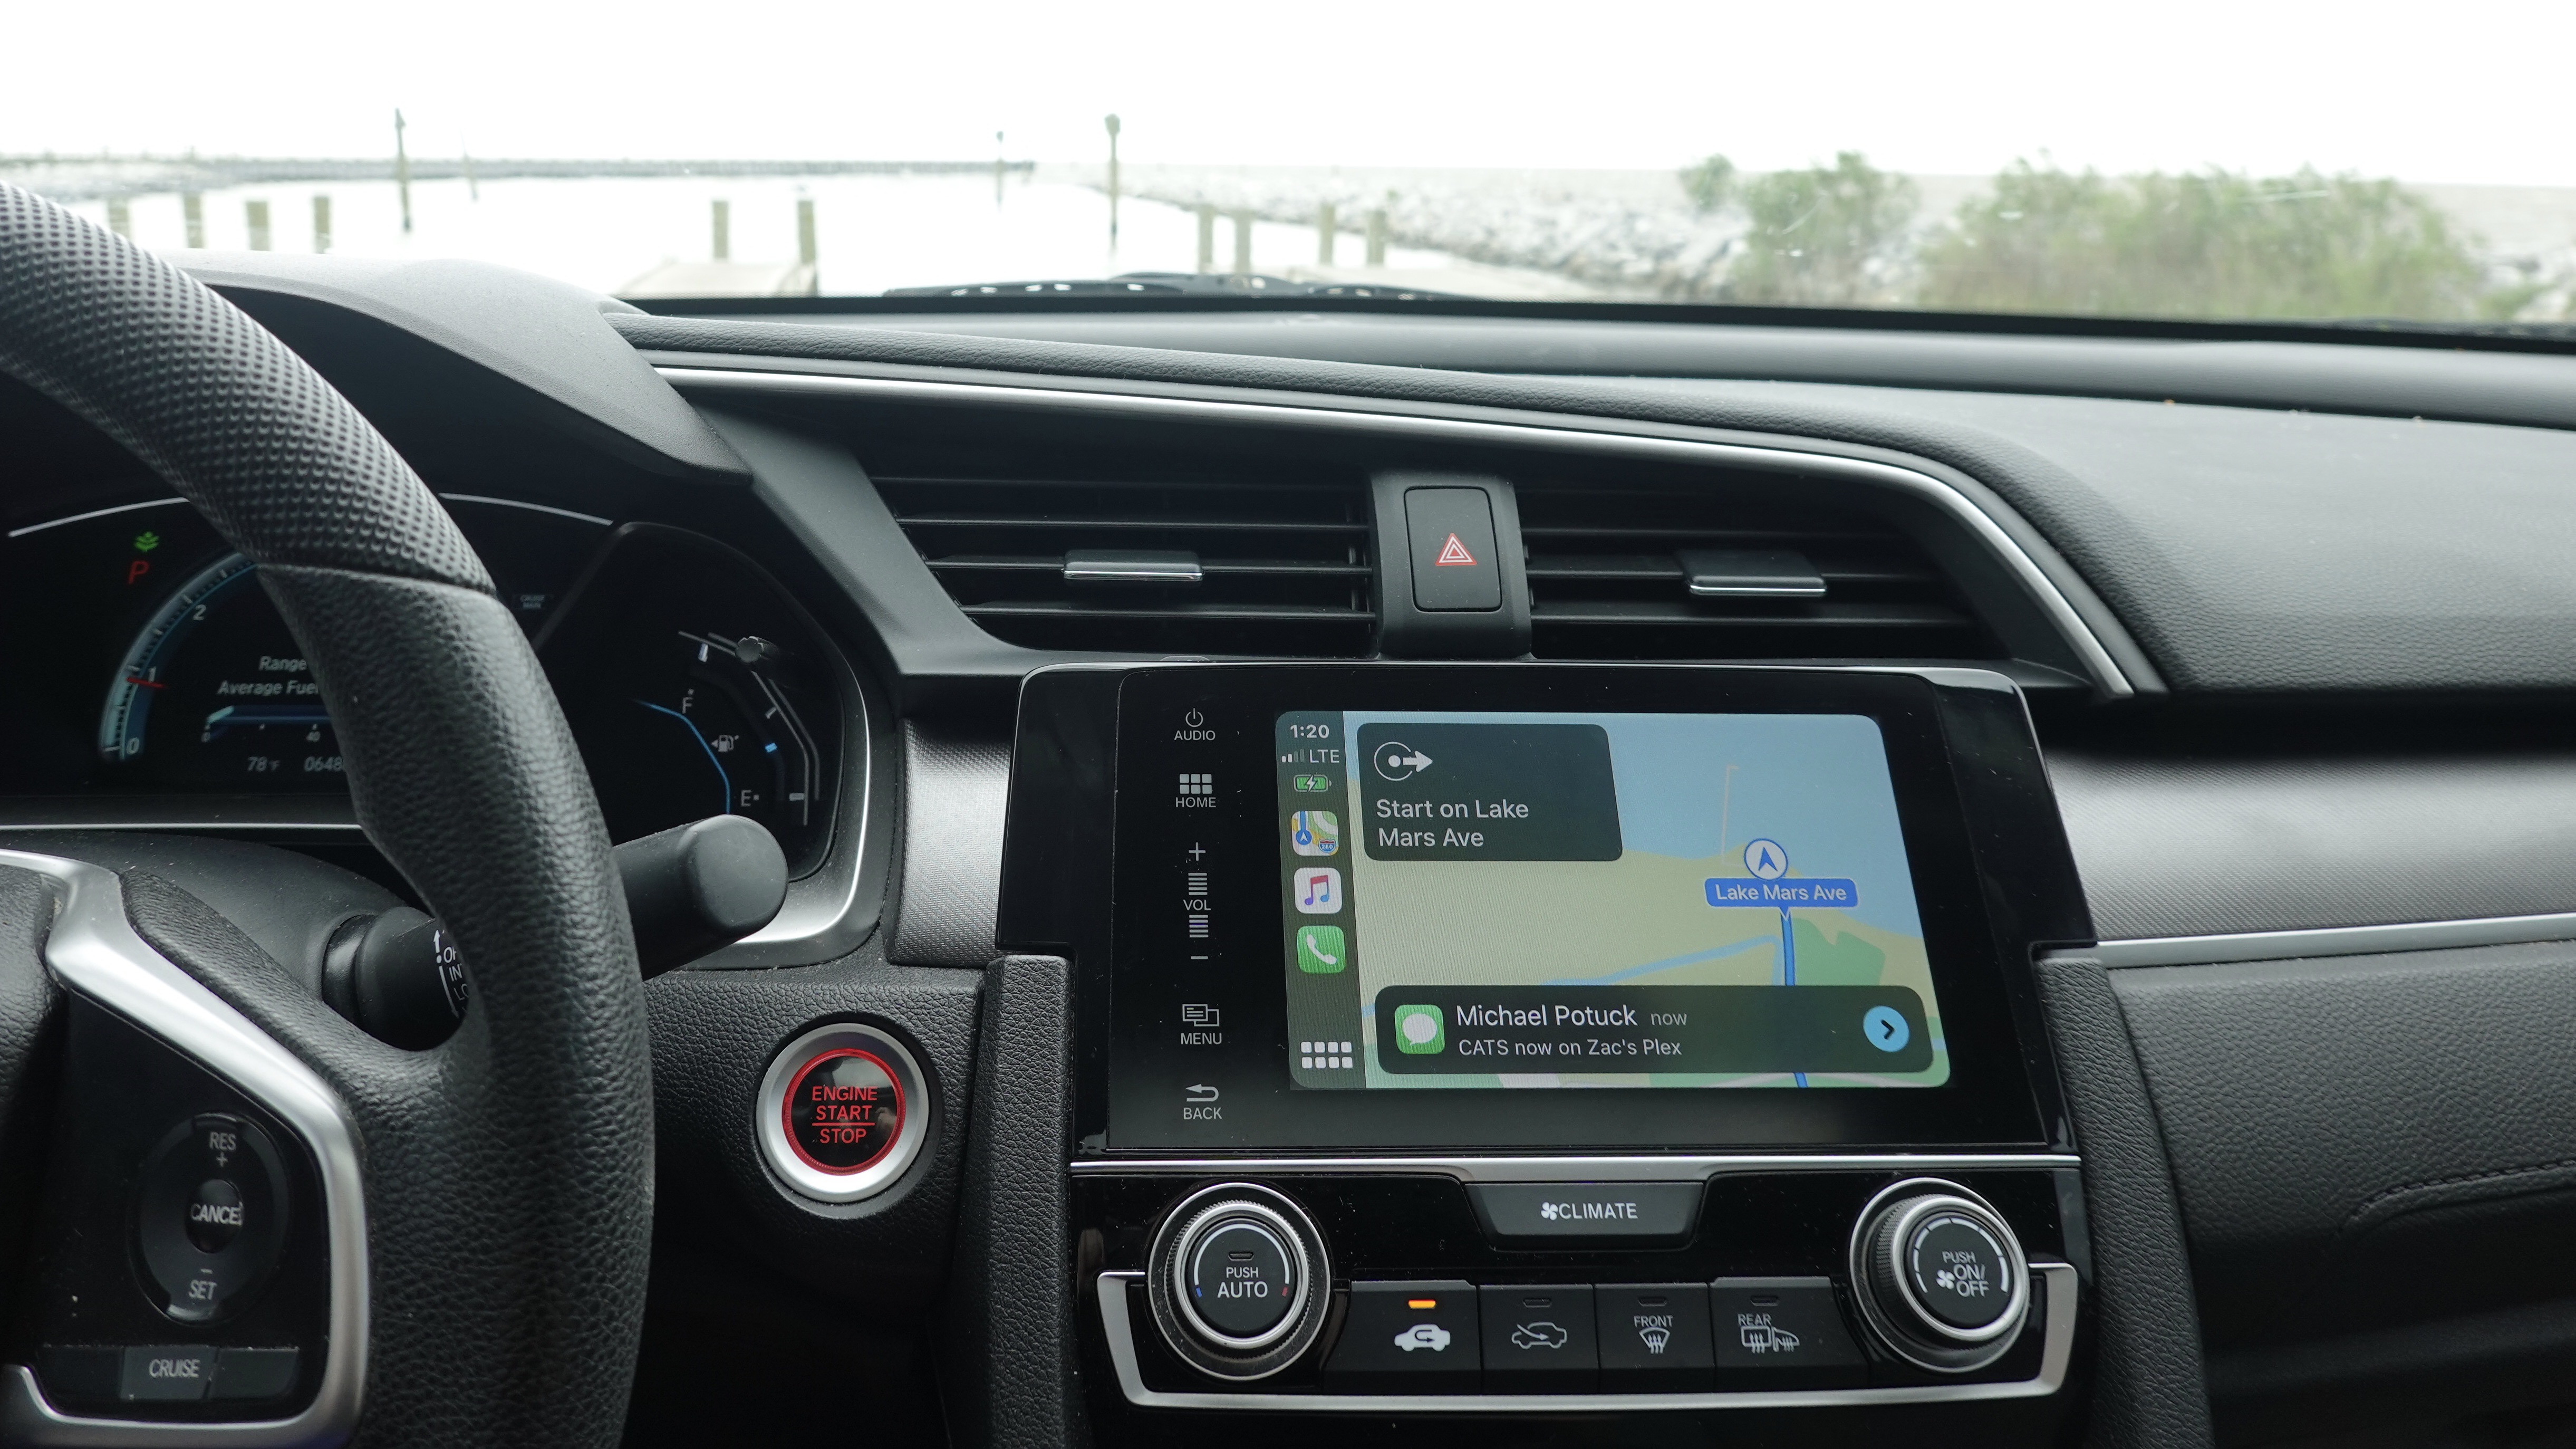 Wireless CarPlay Adapter Recommendations: Everything You Should